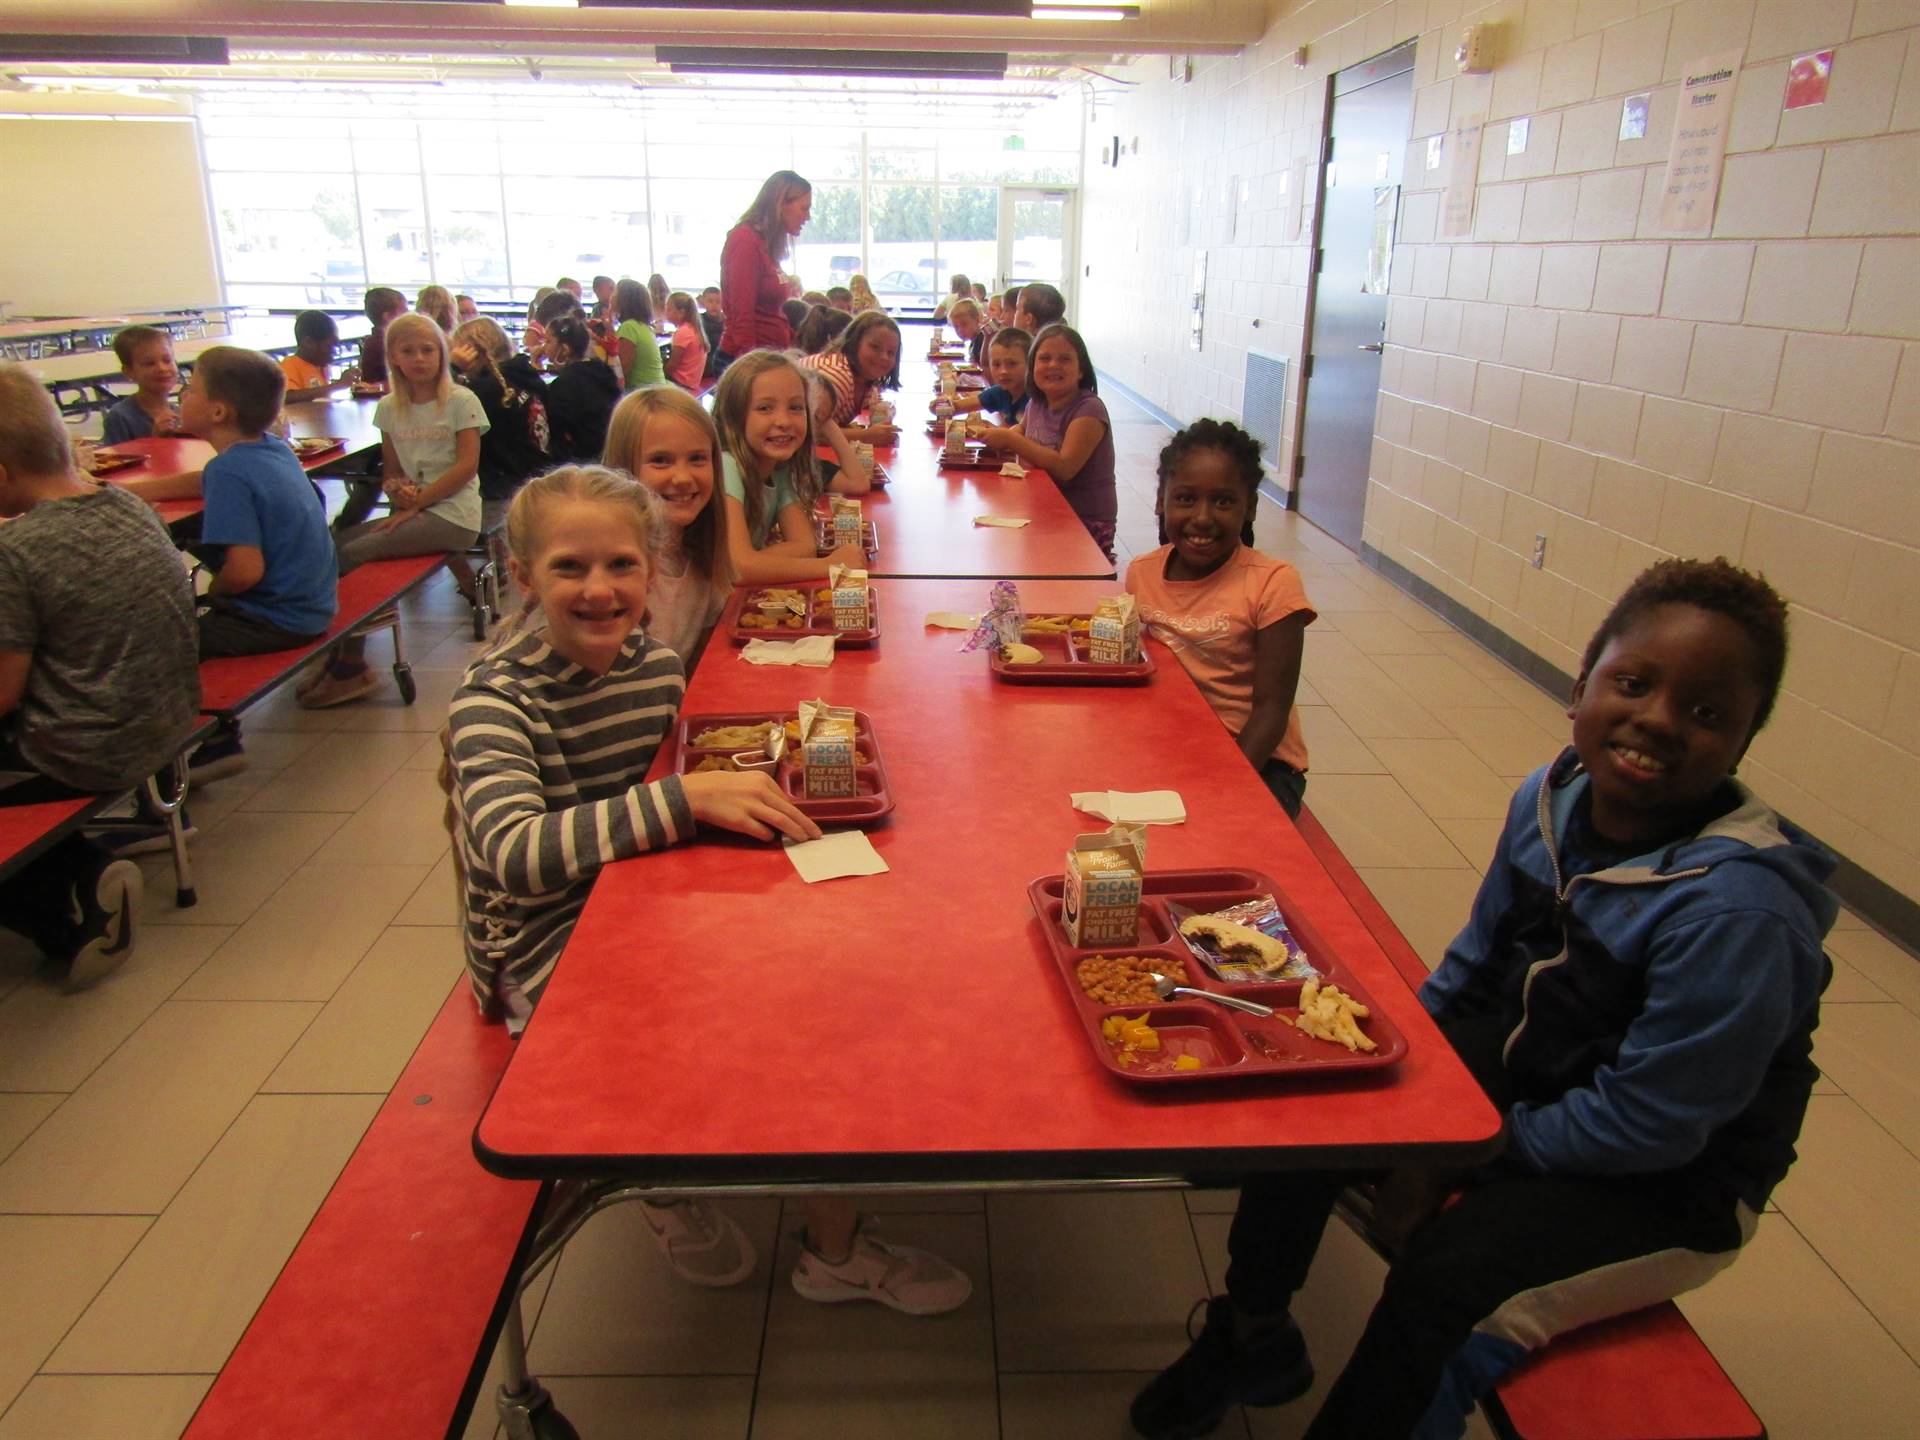 Students eating lunch in the cafeteria